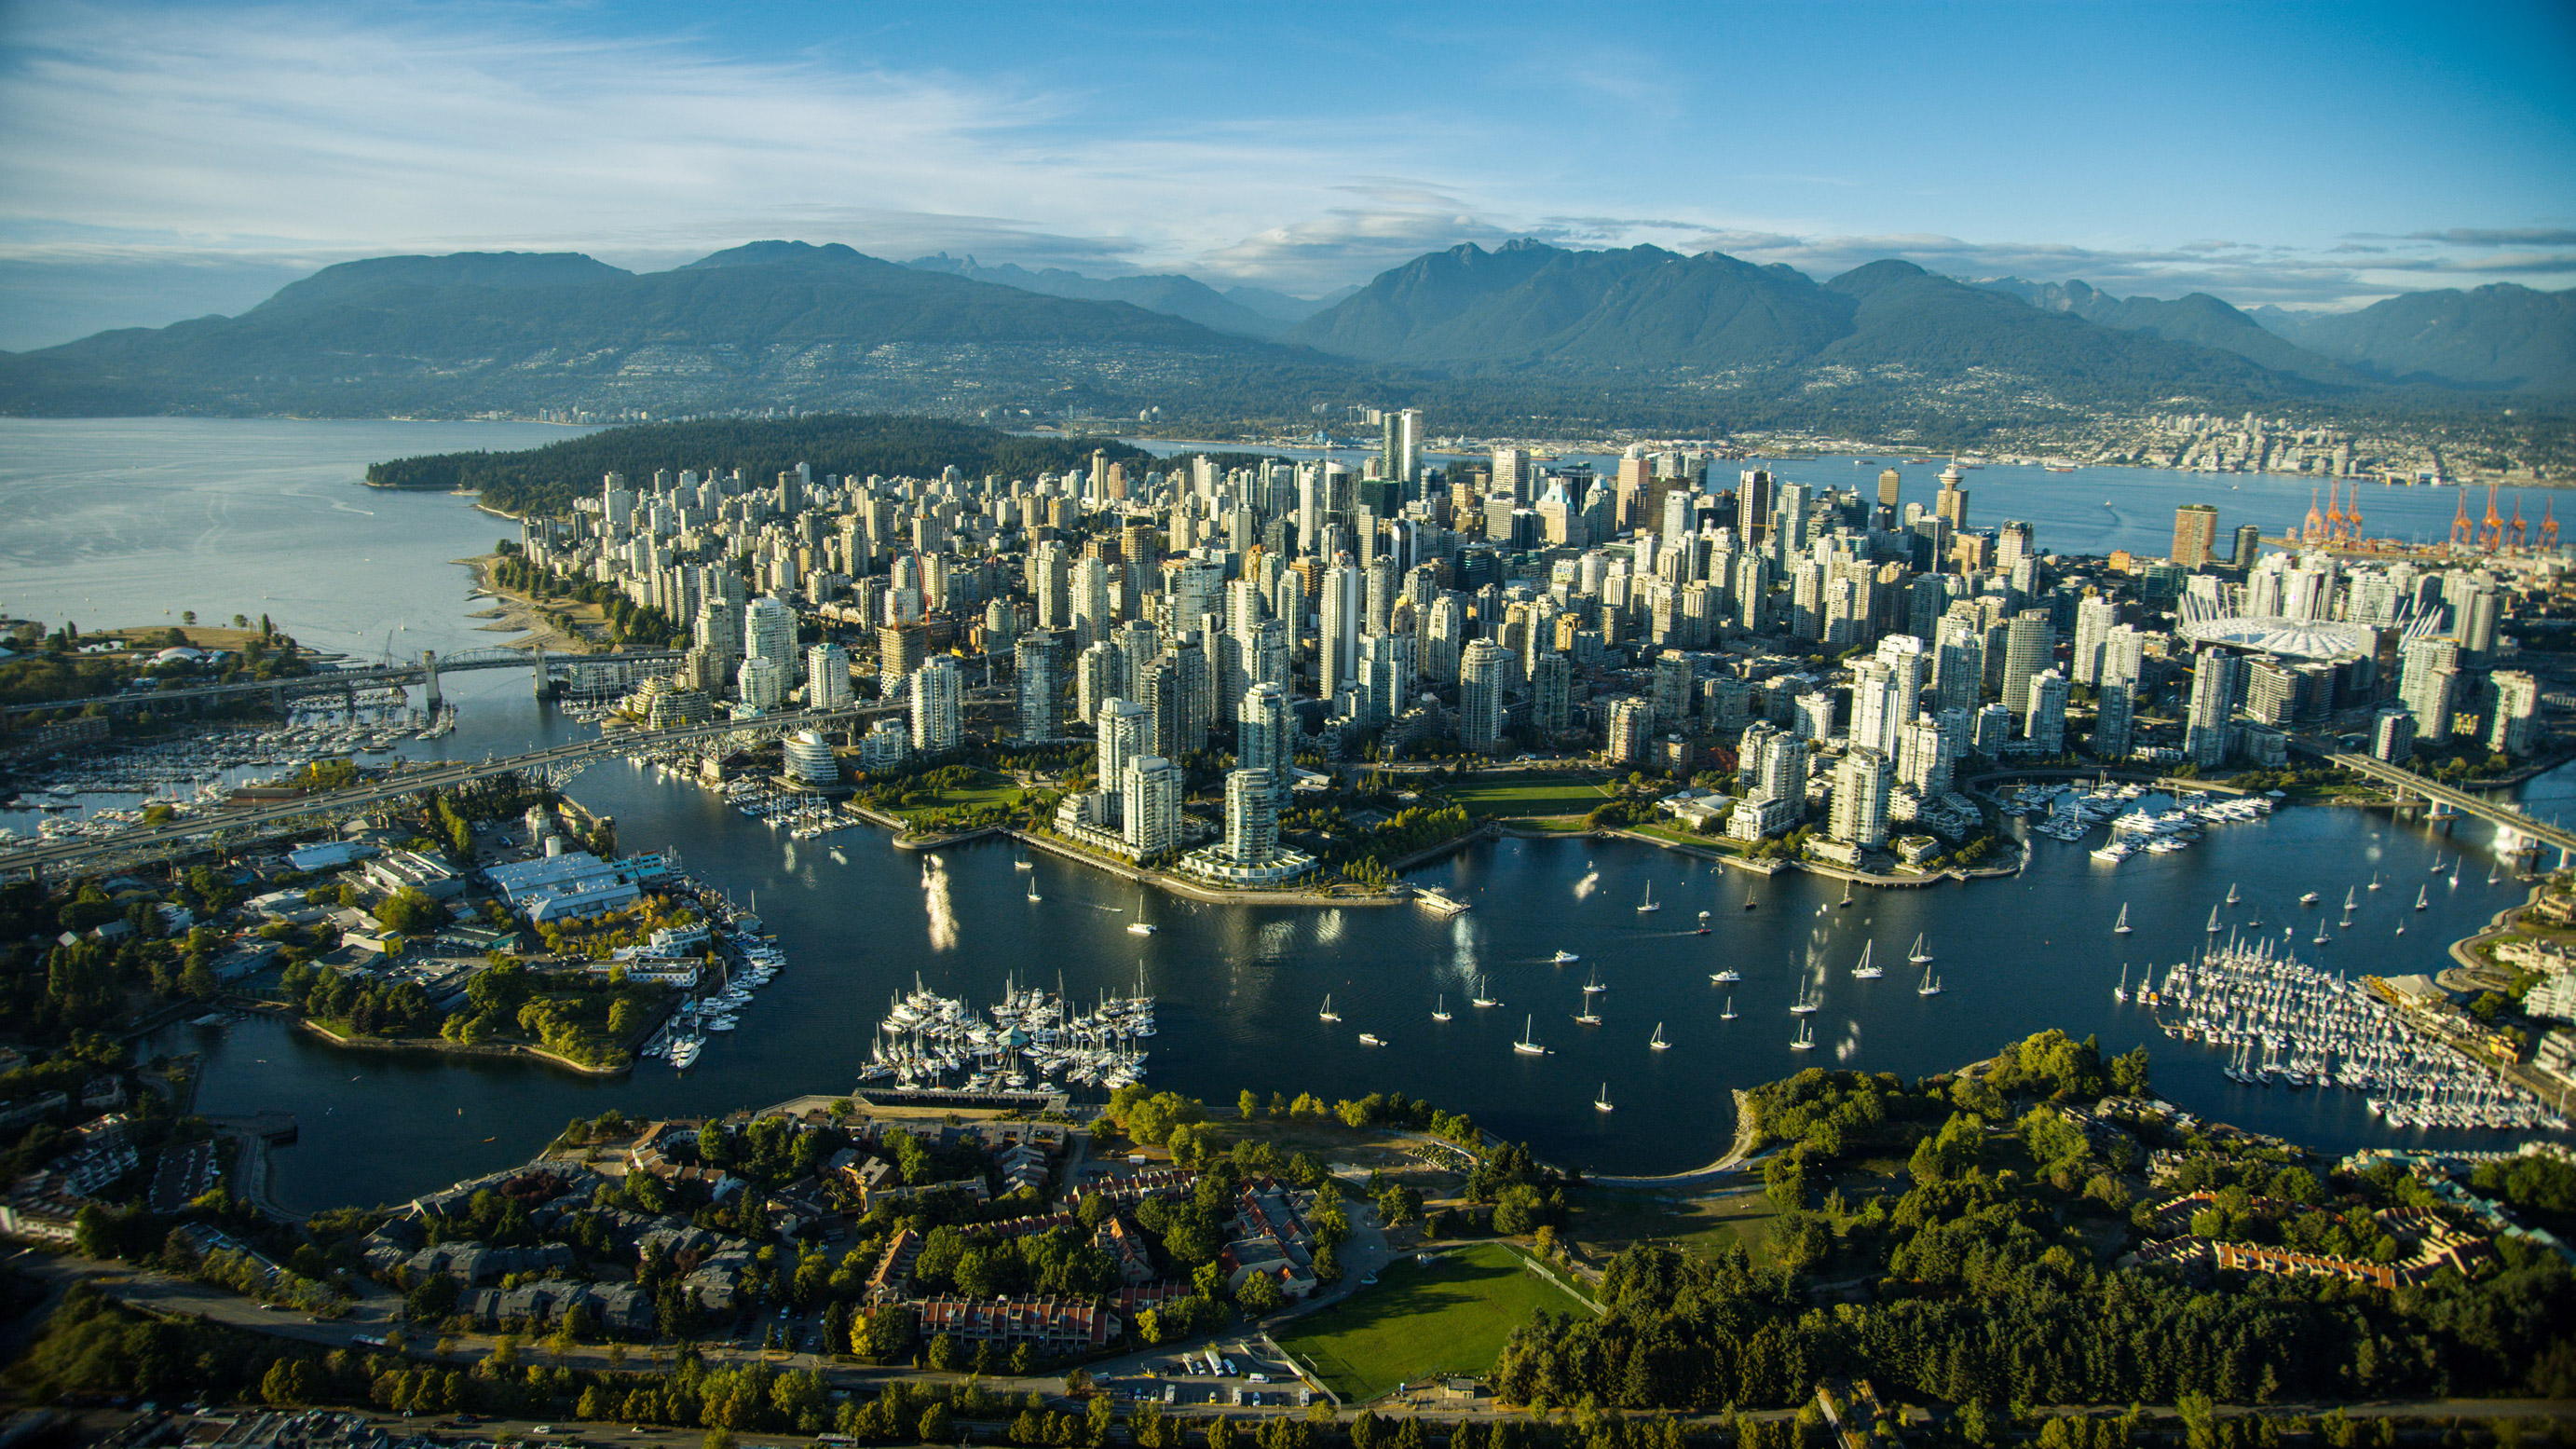 Wide shot of City of Vancouver known for its BC Cannabis
